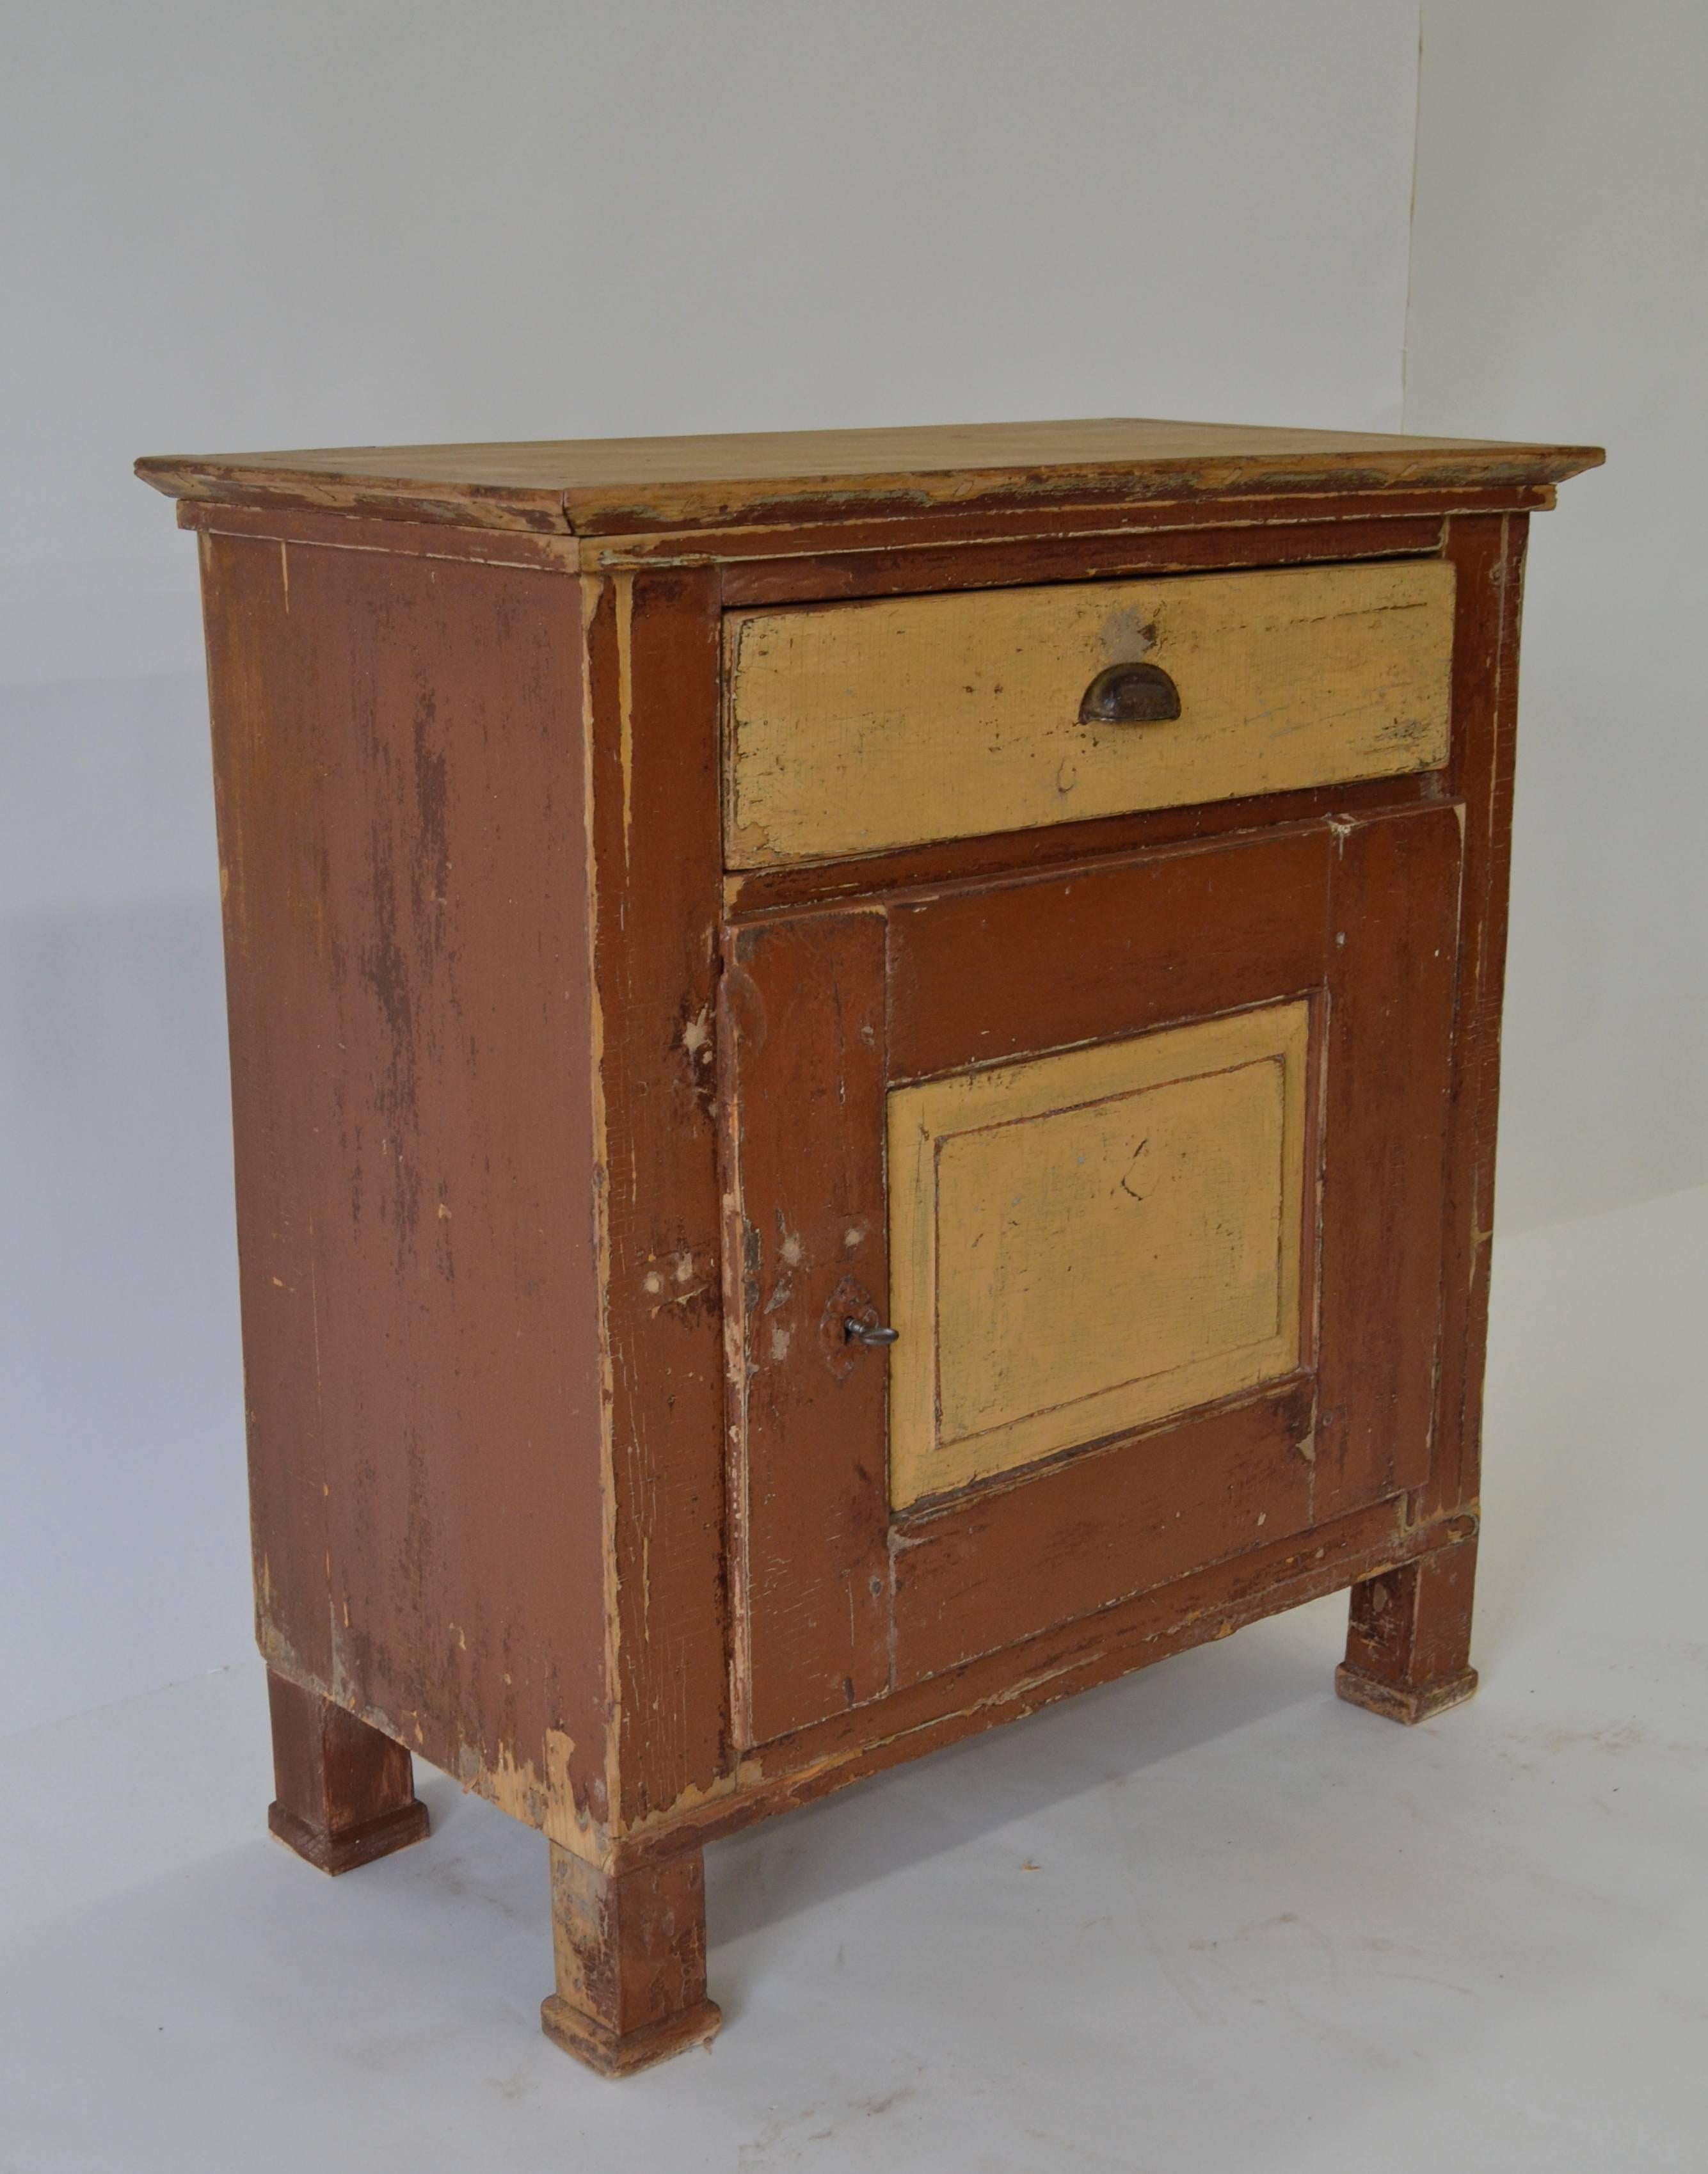 A simple country one-door pine base with great character and superb construction in a classic central European form. Straight rails and stiles enclose a single hand-cut dovetailed drawer with a bin pull handle and a single overlay door with a raised